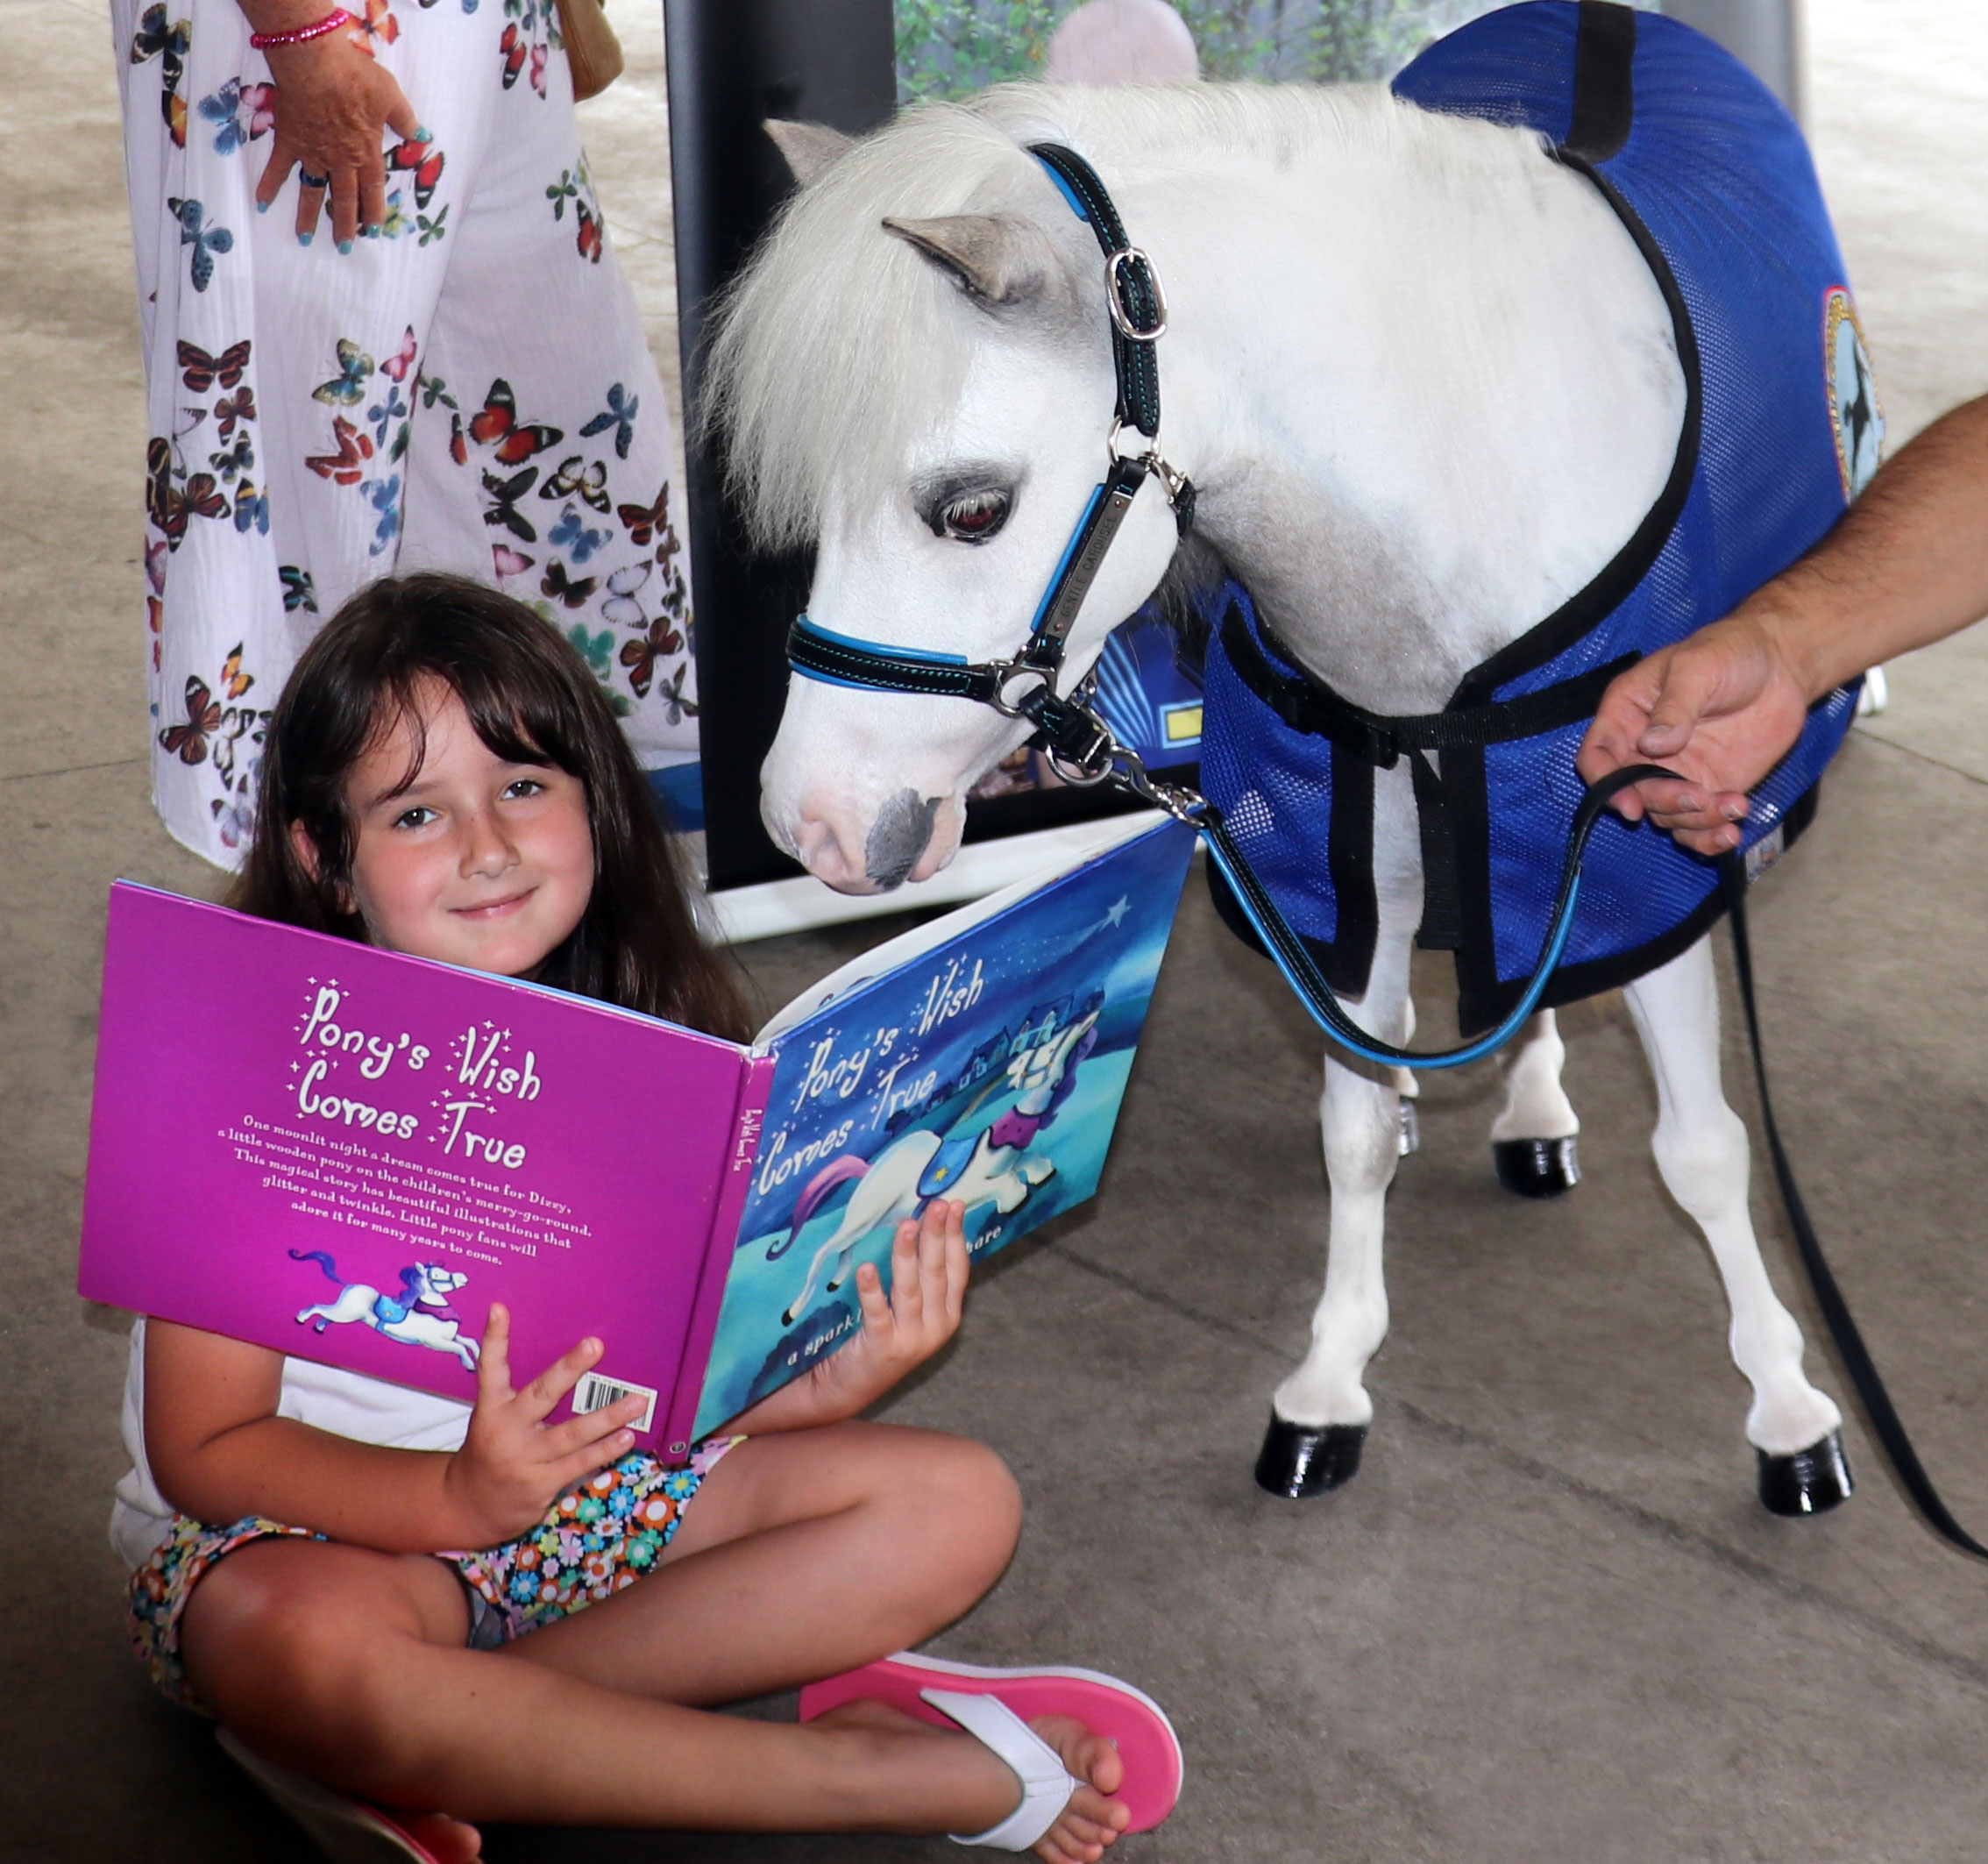 A miniature horse and a young girl share a book.